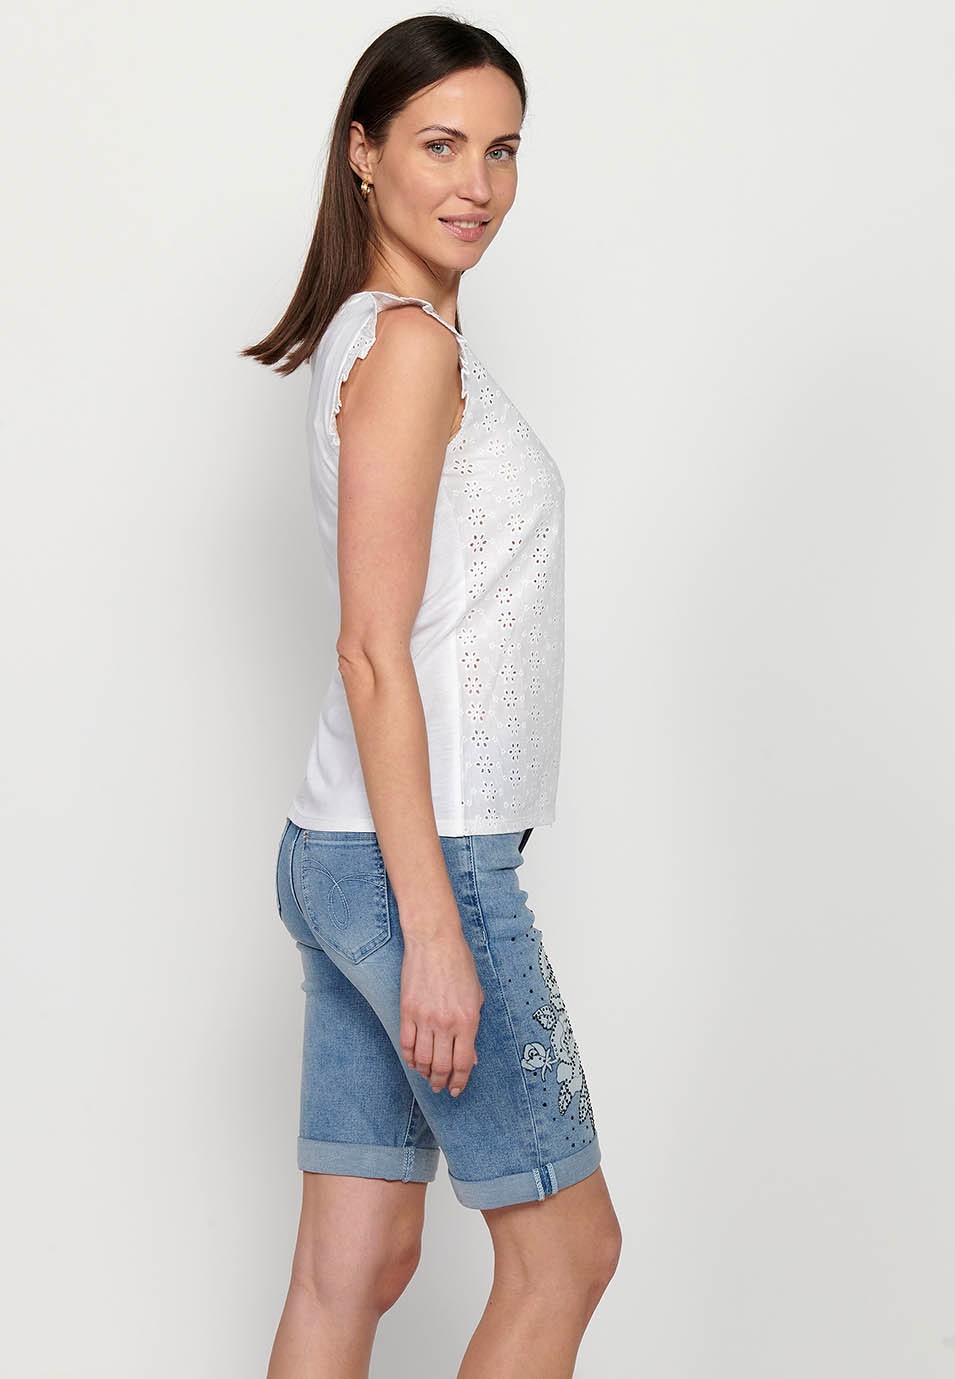 Short sleeve t-shirt, ruffle on the shoulders, white color for women